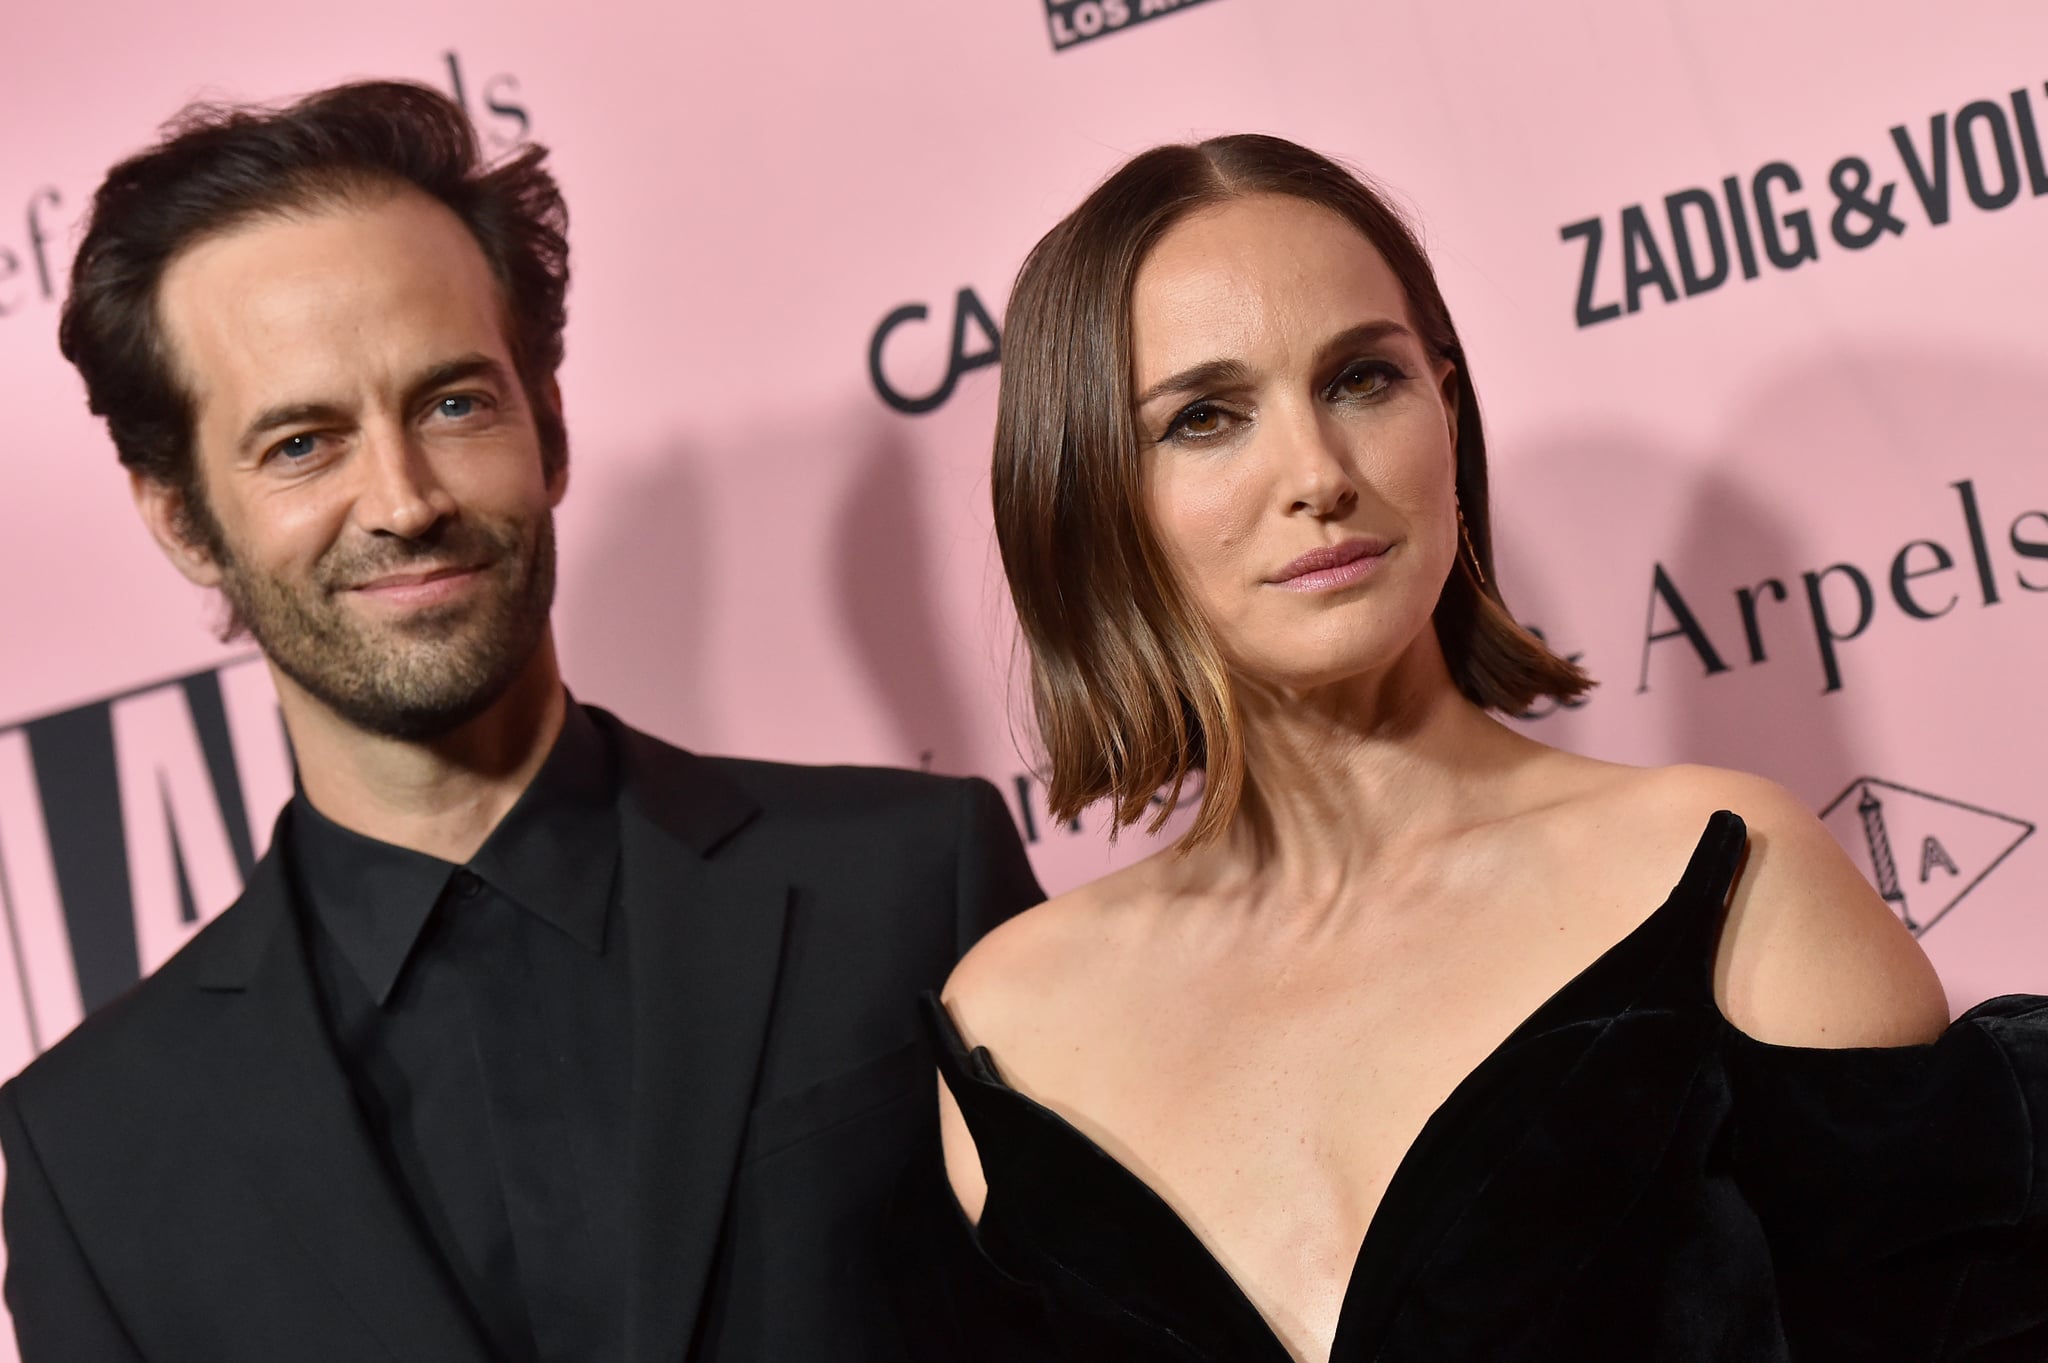 LOS ANGELES, CALIFORNIA - OCTOBER 16: Benjamin Millepied and Natalie Portman attend the L.A. Dance Project Annual Gala on October 16, 2021 in Los Angeles, California. (Photo by Axelle/Bauer-Griffin/FilmMagic)